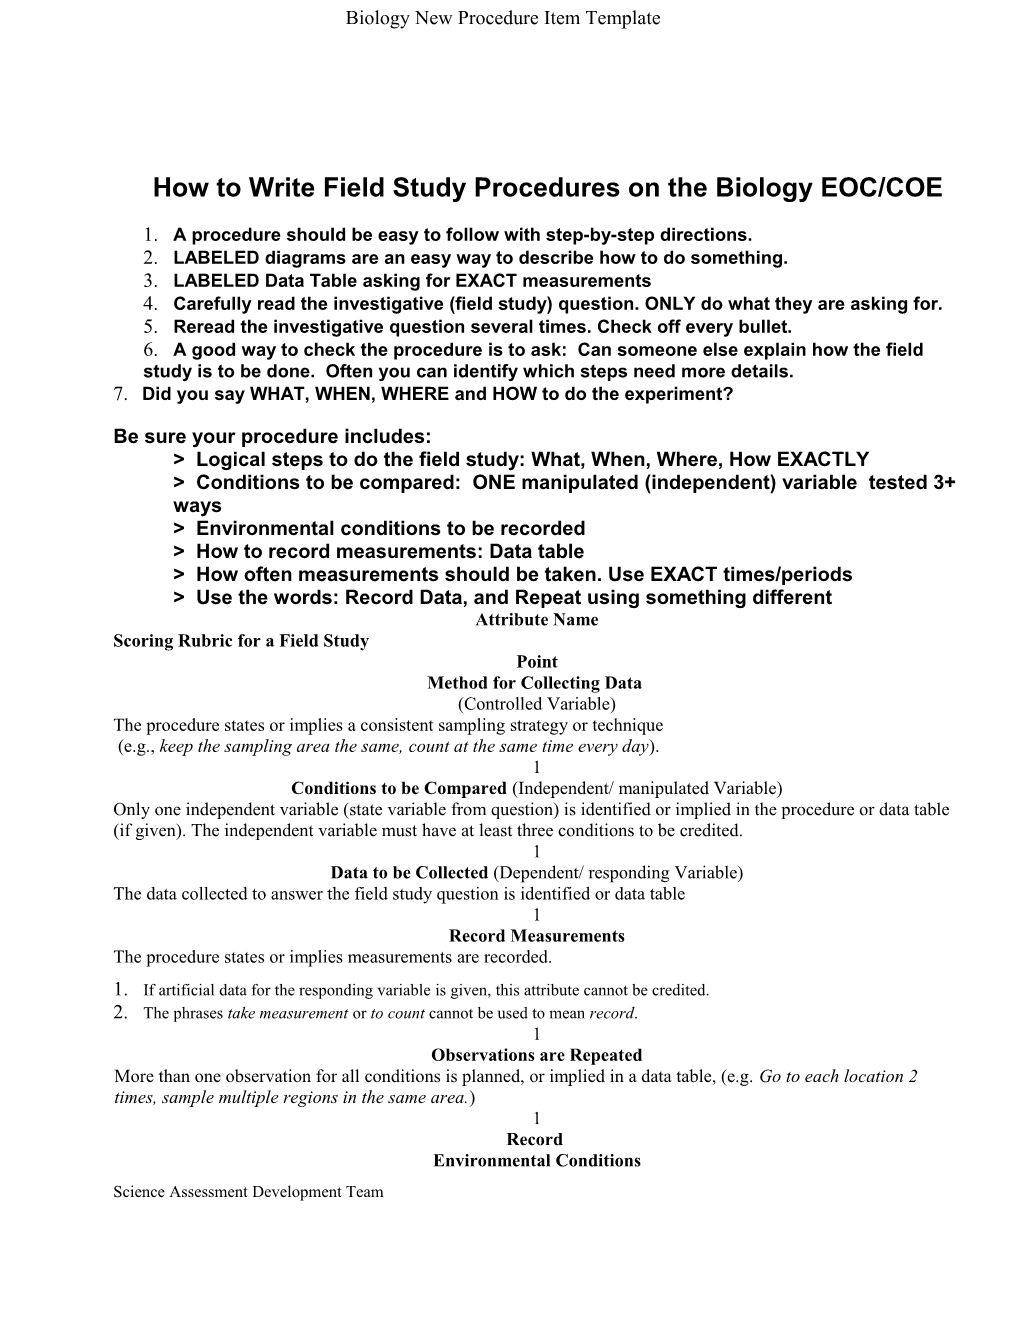 Biology New Procedure Item Template Biology End-Of-Course